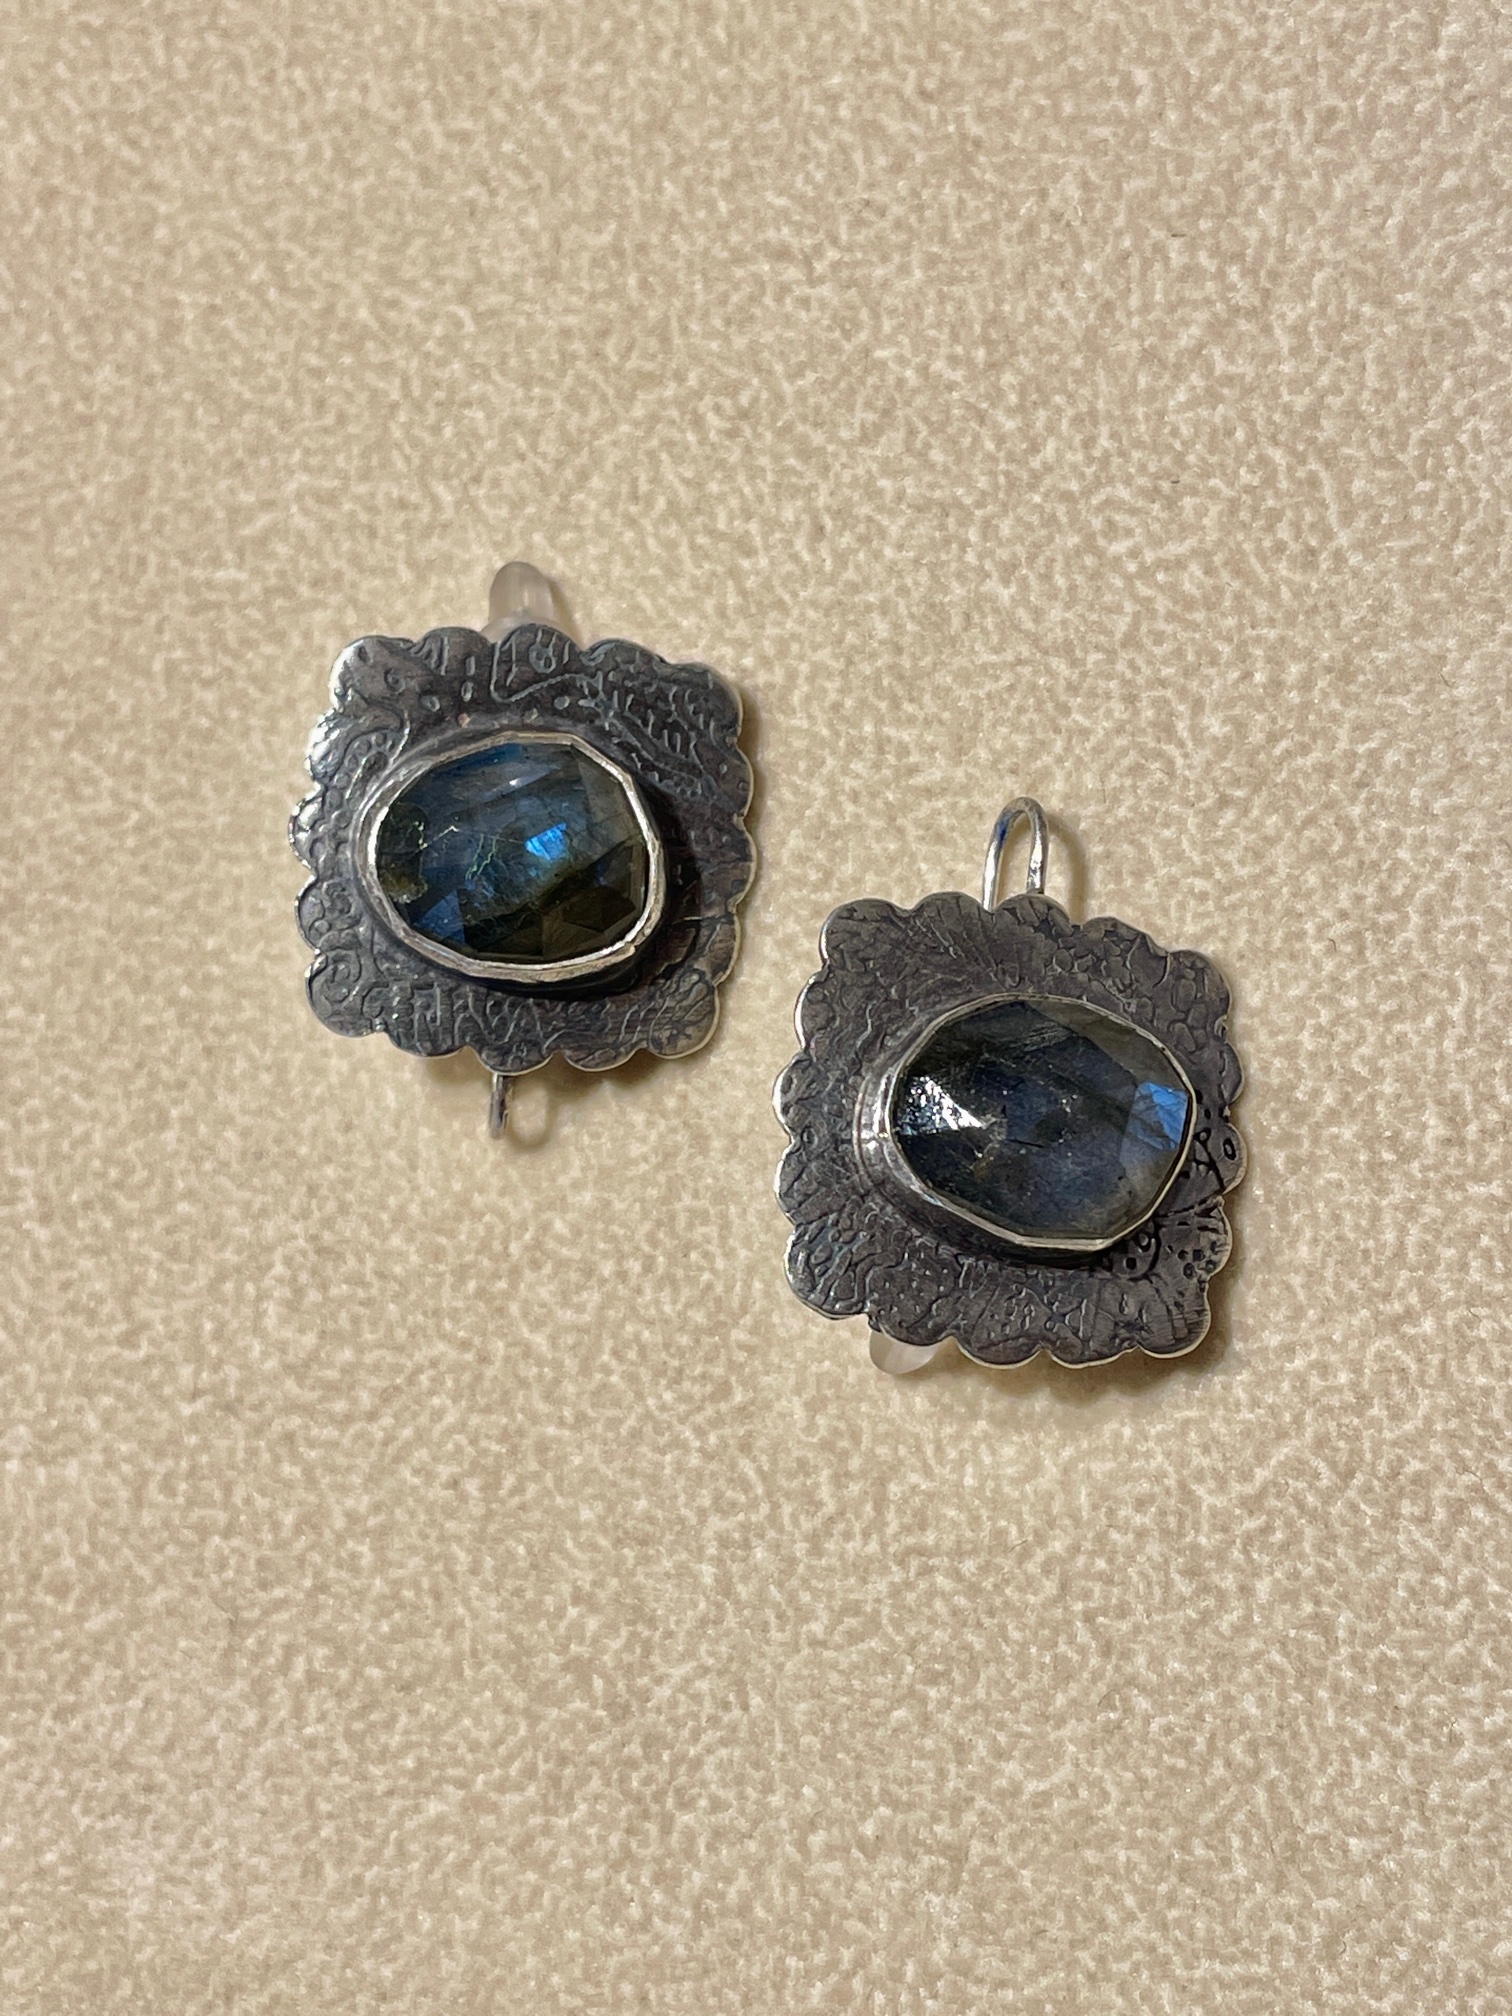 Square Labradorite and Sterling Earrings with Scalloped Edge